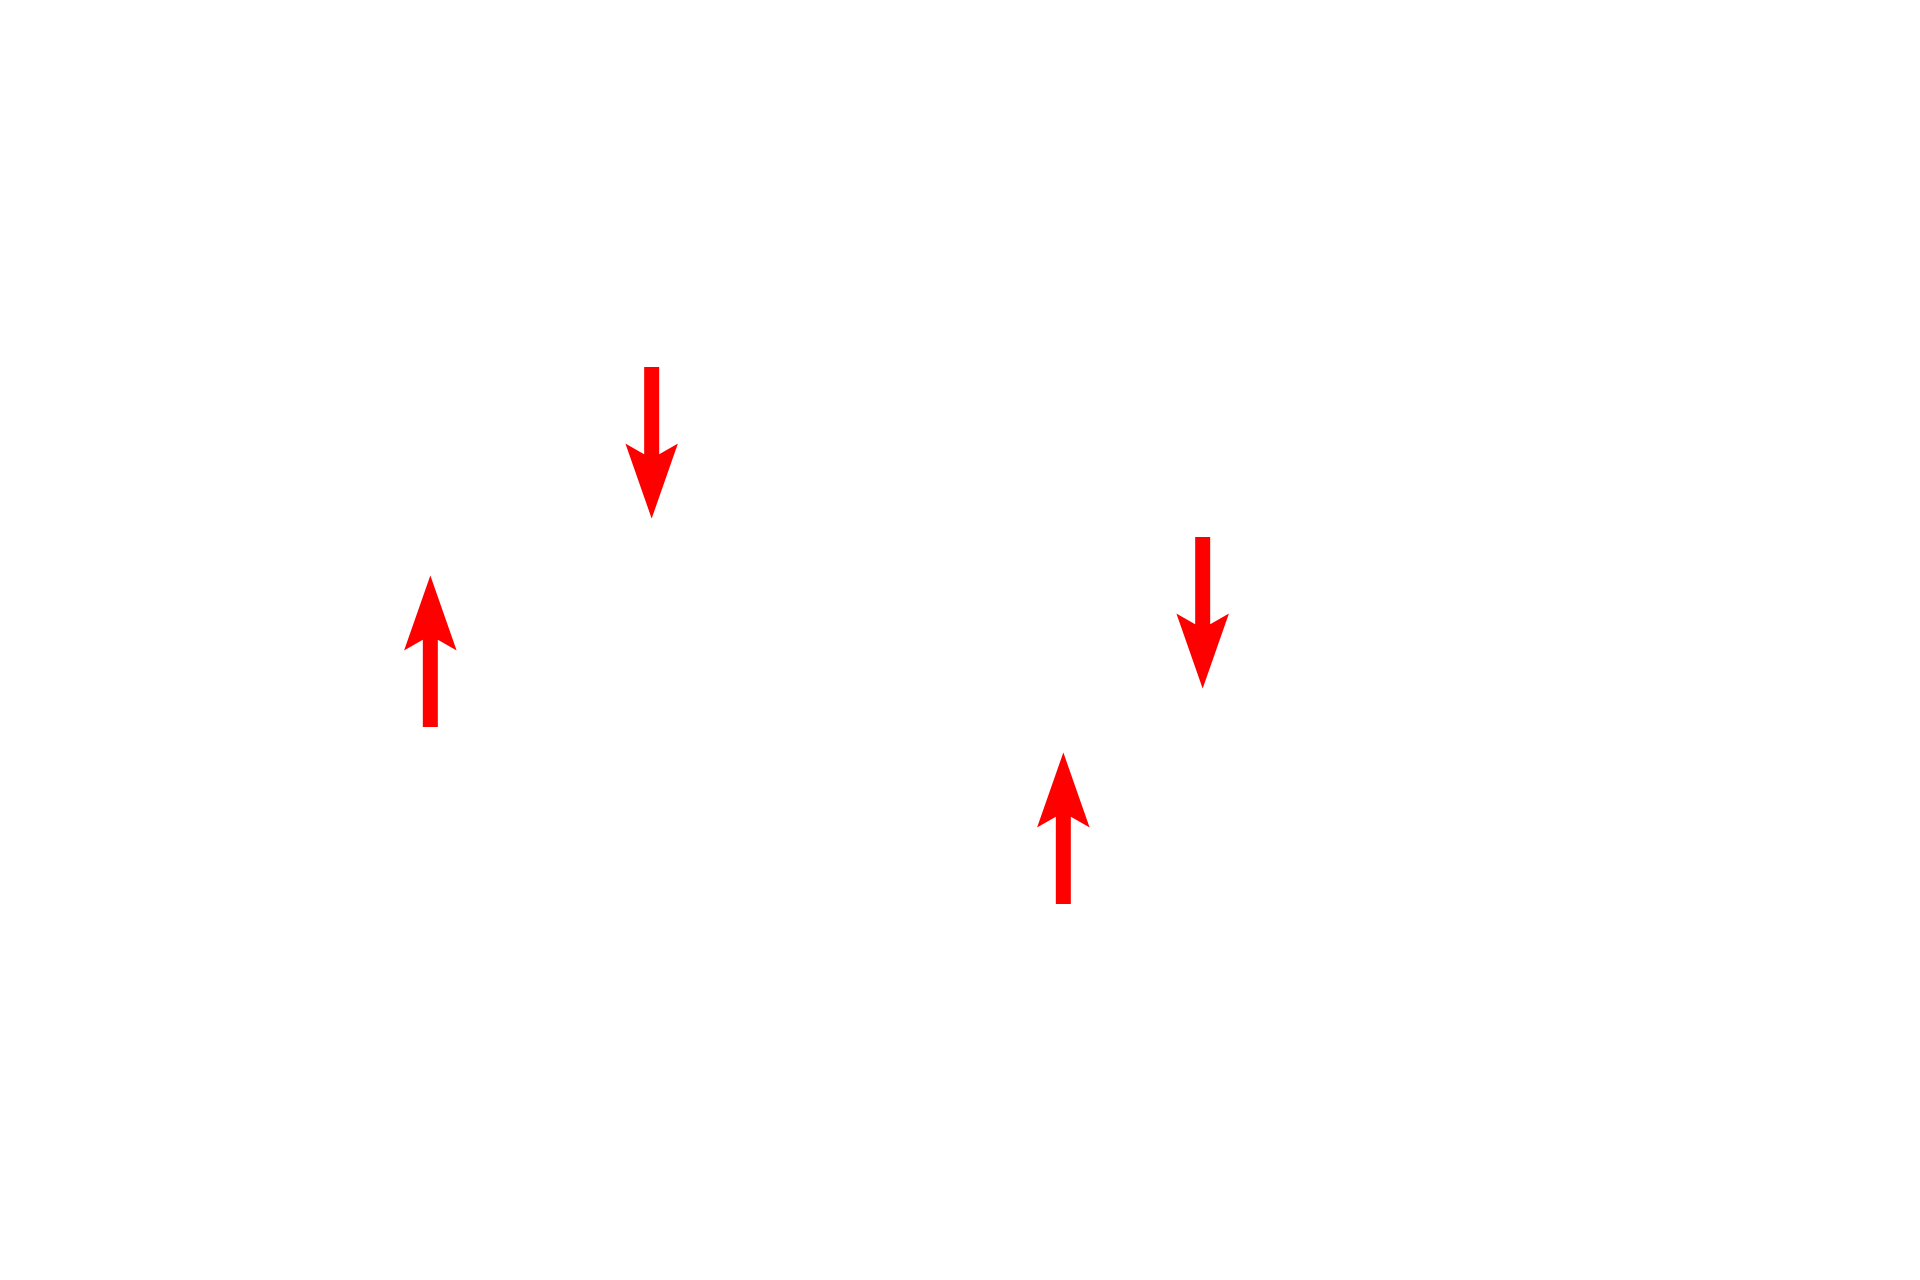  - Pores of nuclear envelope <p>The RER consists of flattened, interconnected membranous sacs (cisterns) continuous with the nuclear envelope.  RER possesses ribosomes on the cytoplasmic surface of the membrane.  Proteins synthesized by the RER accumulate within the cisterns and are transported, via transport vesicles, to the Golgi for processing and packaging.  58,000x</p>
